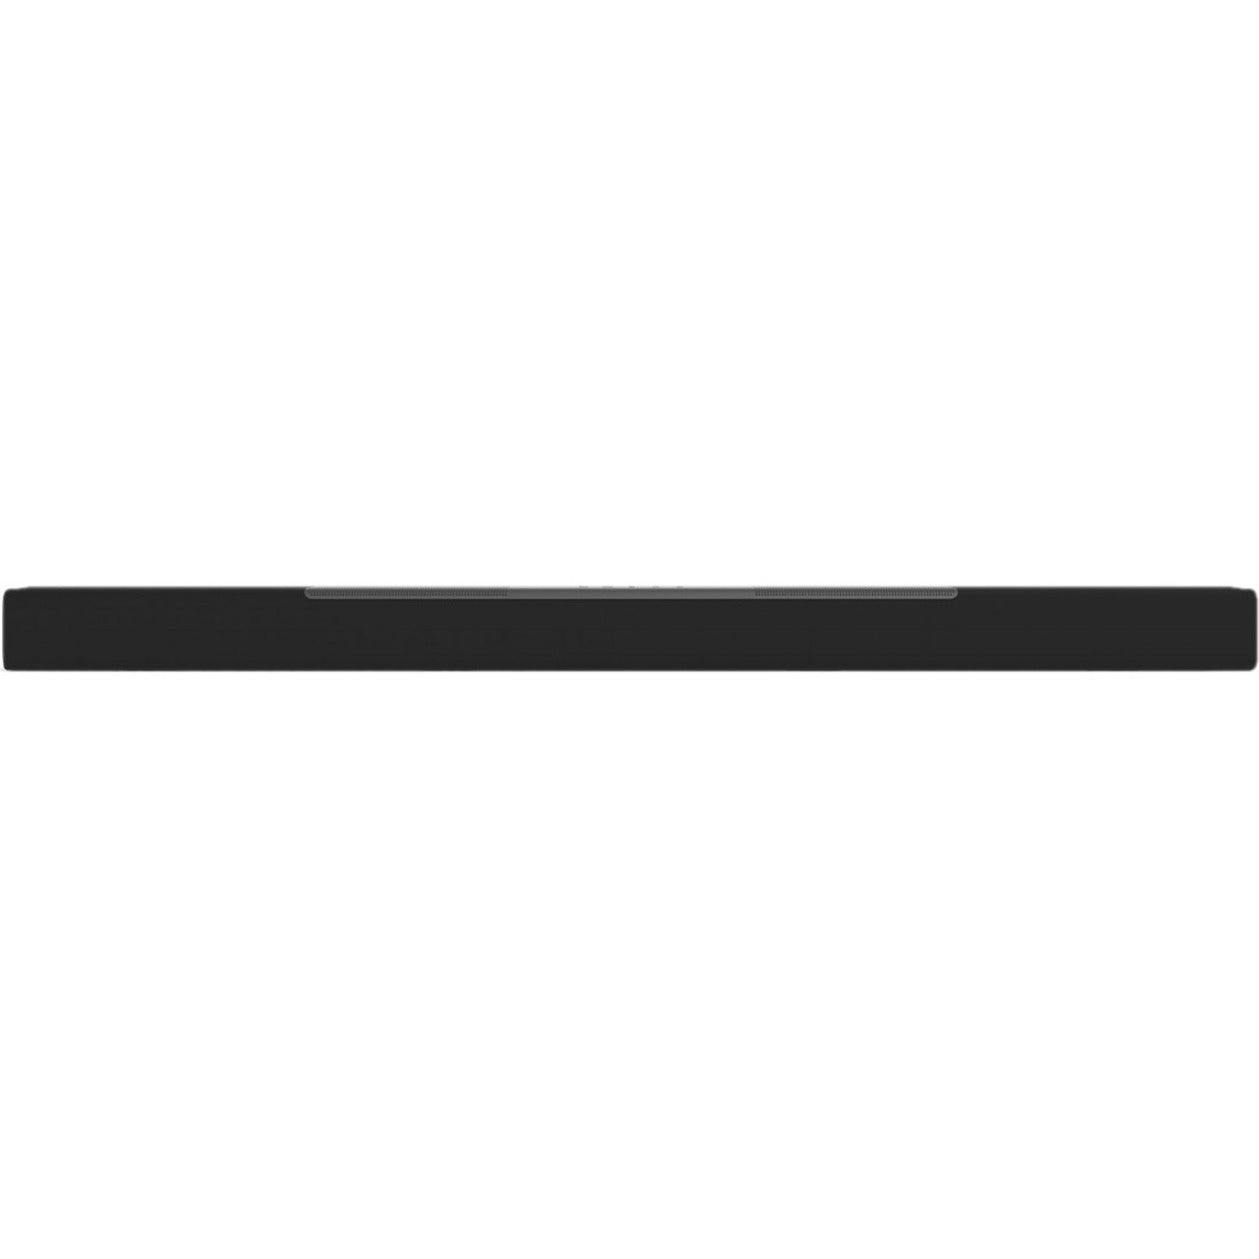 VIZIO M512A-H6 M512a-H6 5.1.2 Home Theater Sound Bar with Dolby Atmos and DTS:X, Wireless Subwoofer Connectivity, Remote Control, Spotify Connect